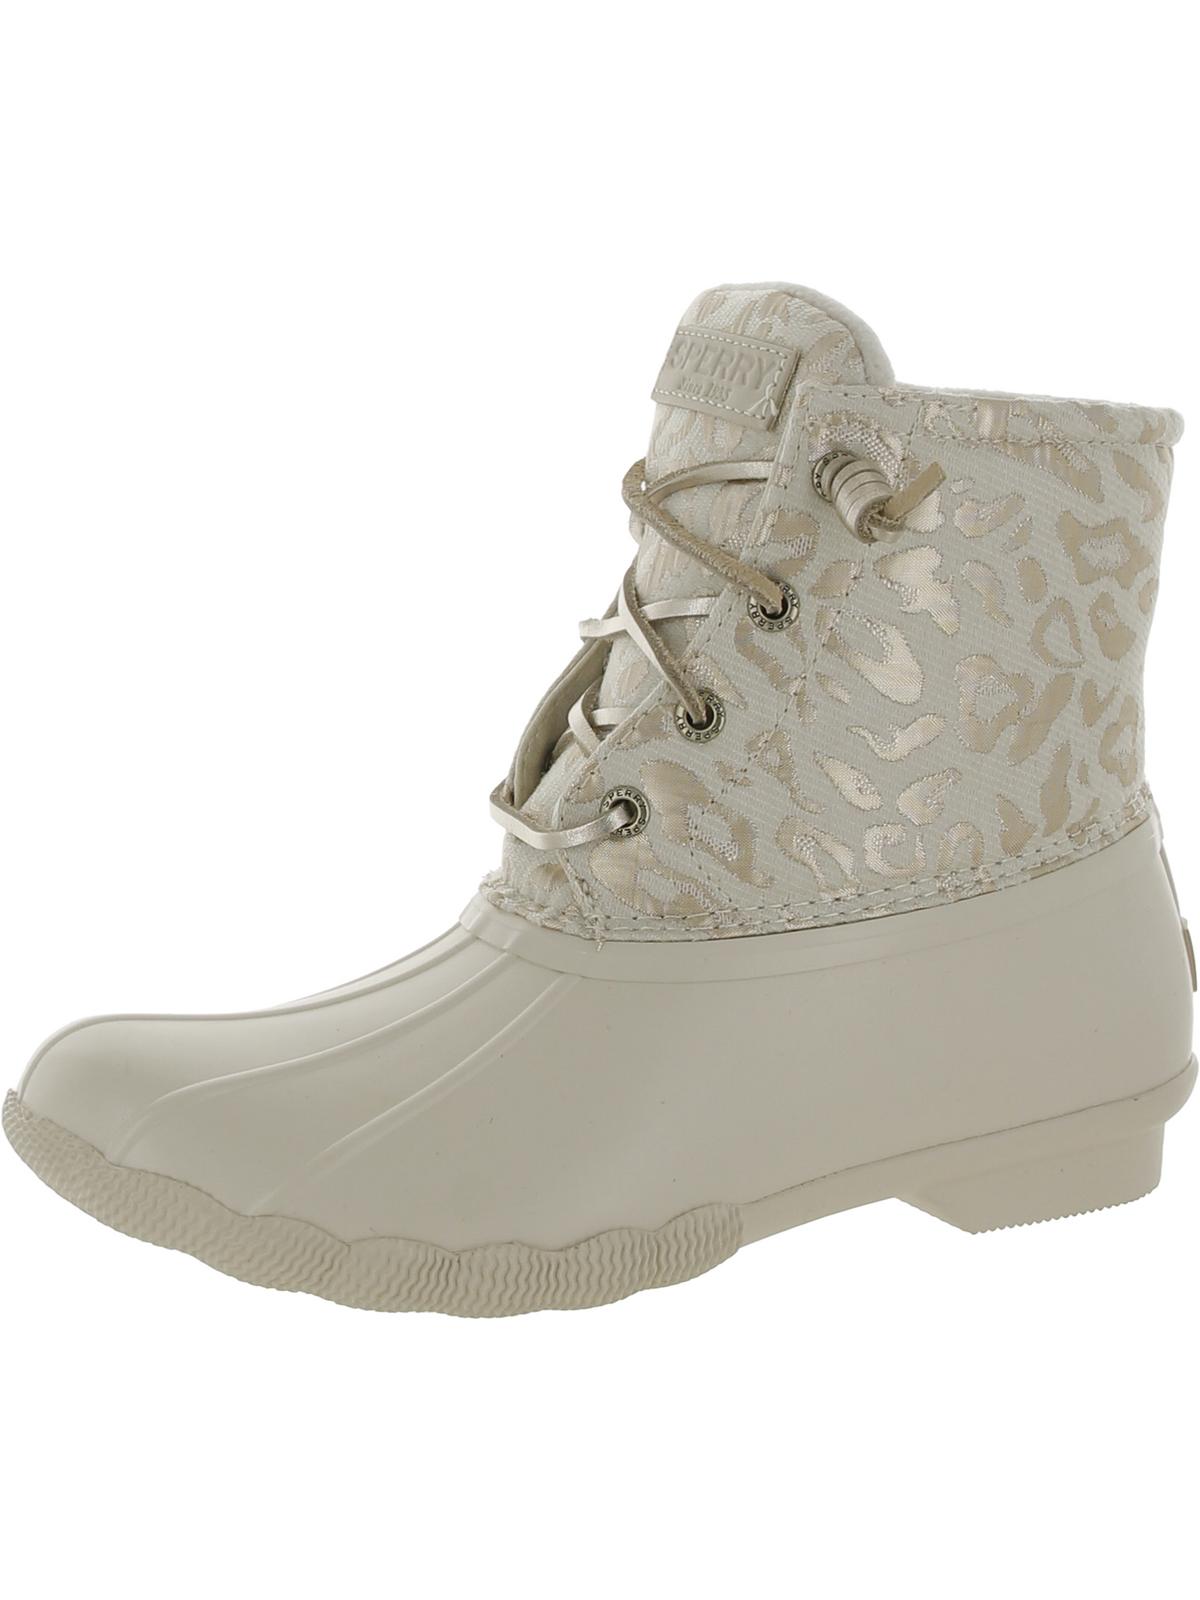 Shop Sperry Saltwater Womens Embroidered Manmade Rain Boots In Multi